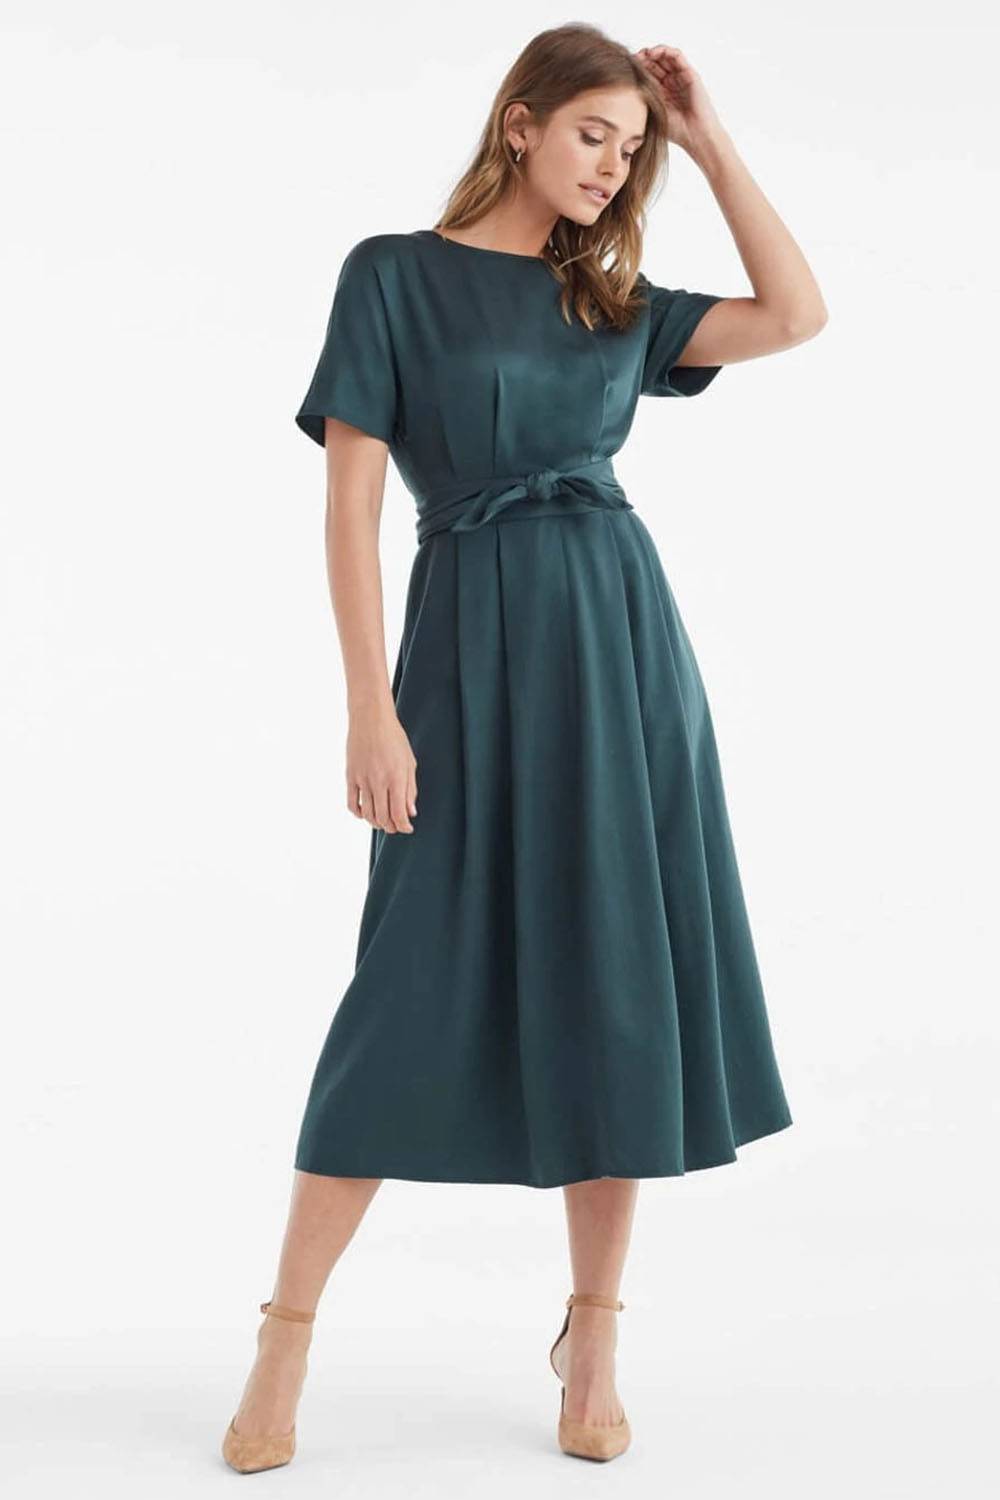 15 Best Stylish Designer Maternity Gowns For The Office | Panaprium